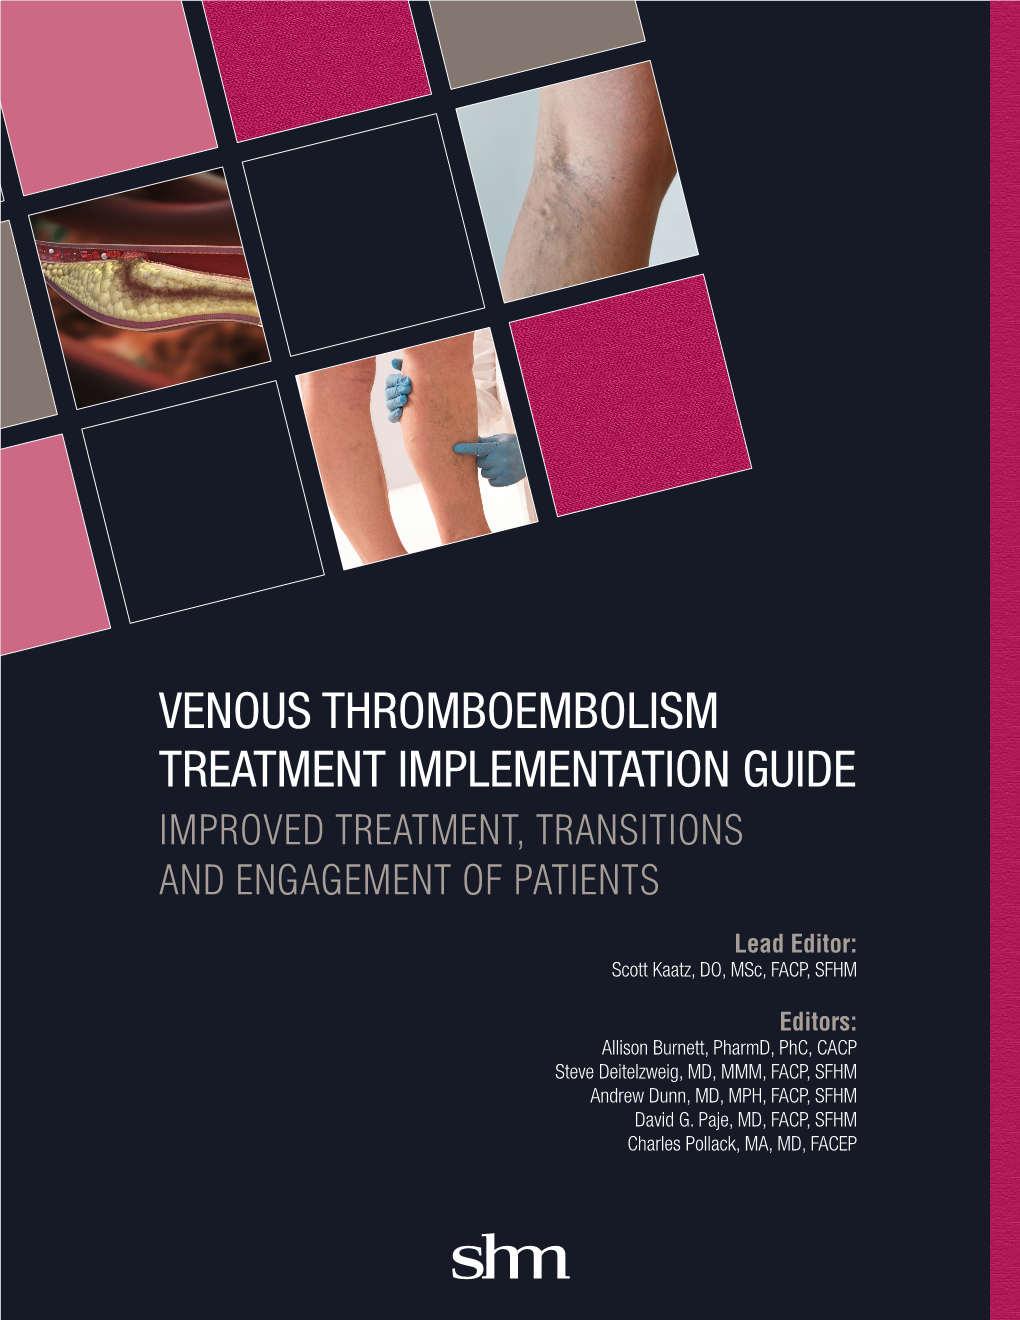 Venous Thromboembolism Treatment Implementation Guide Improved Treatment, Transitions and Engagement of Patients